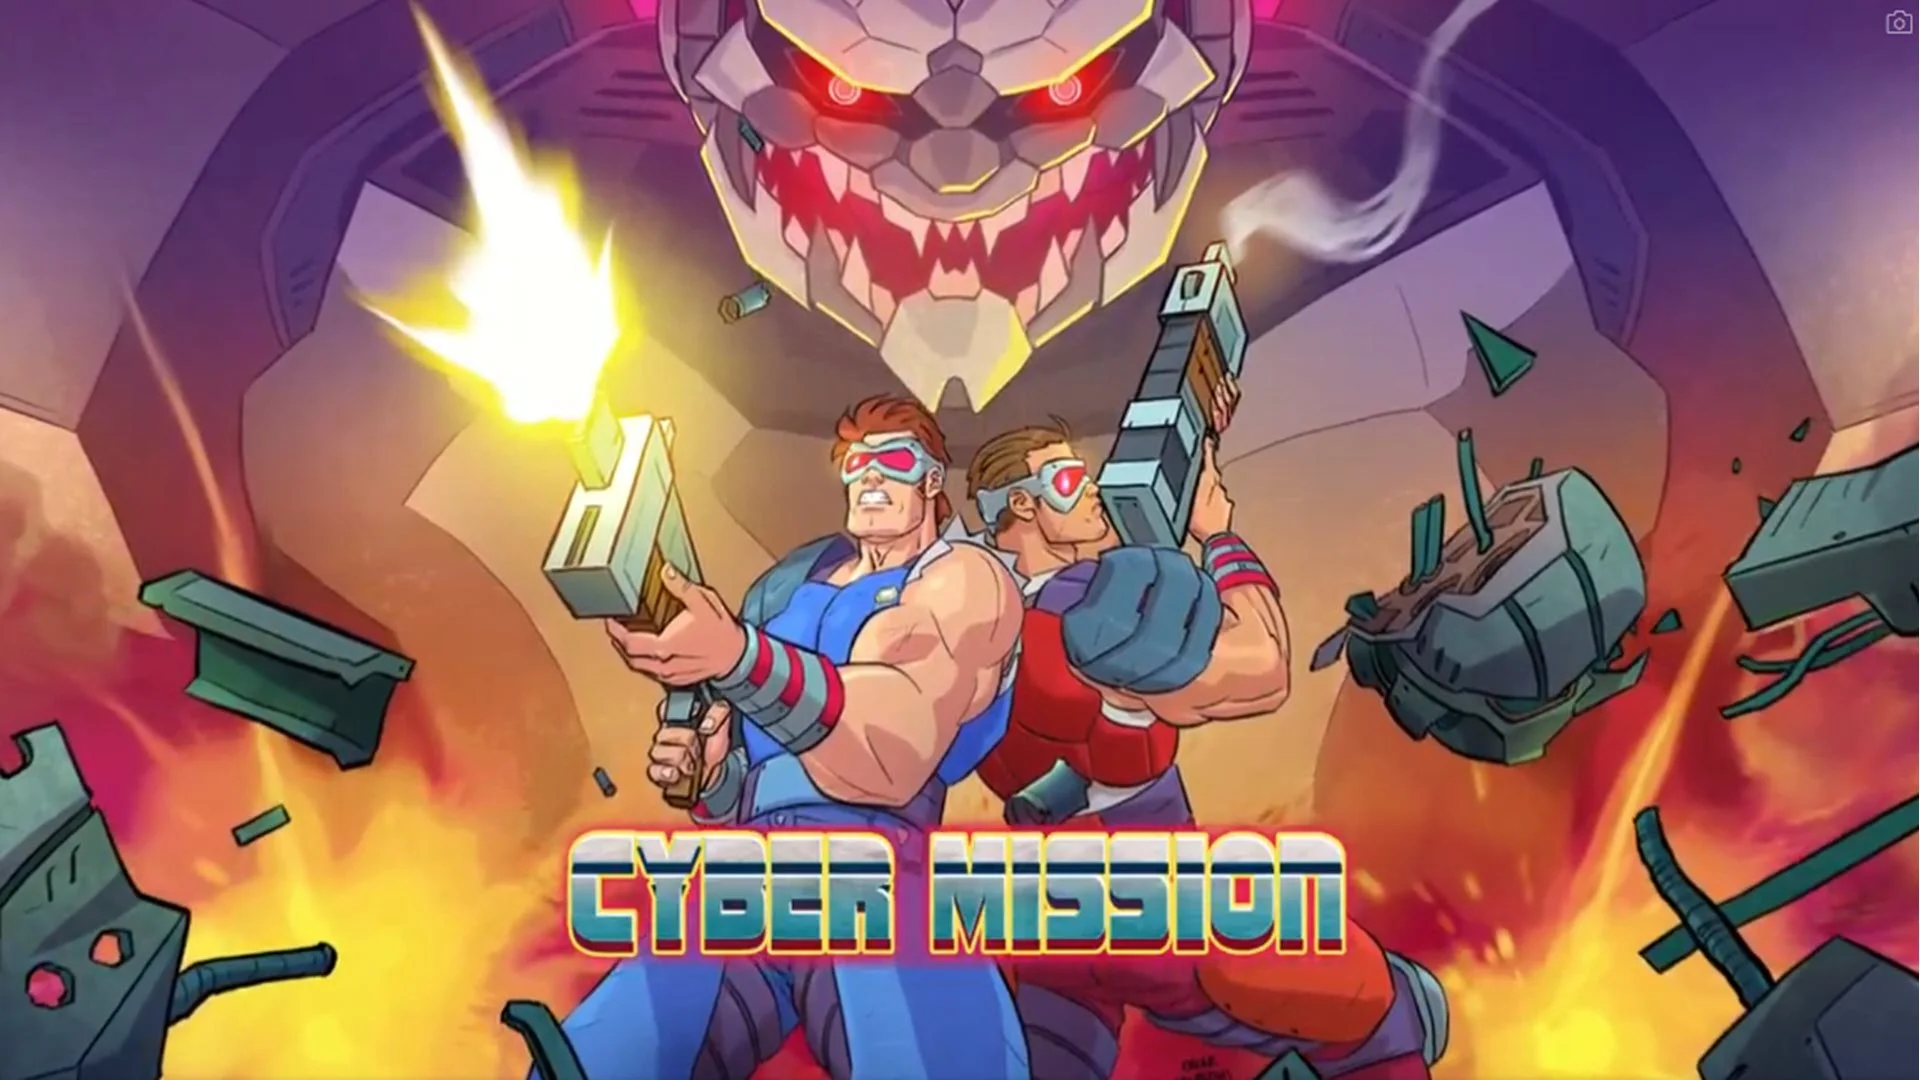 Cyber Mission is a Cool Retro Platformer by Gamenergy Studio and PSCD Games